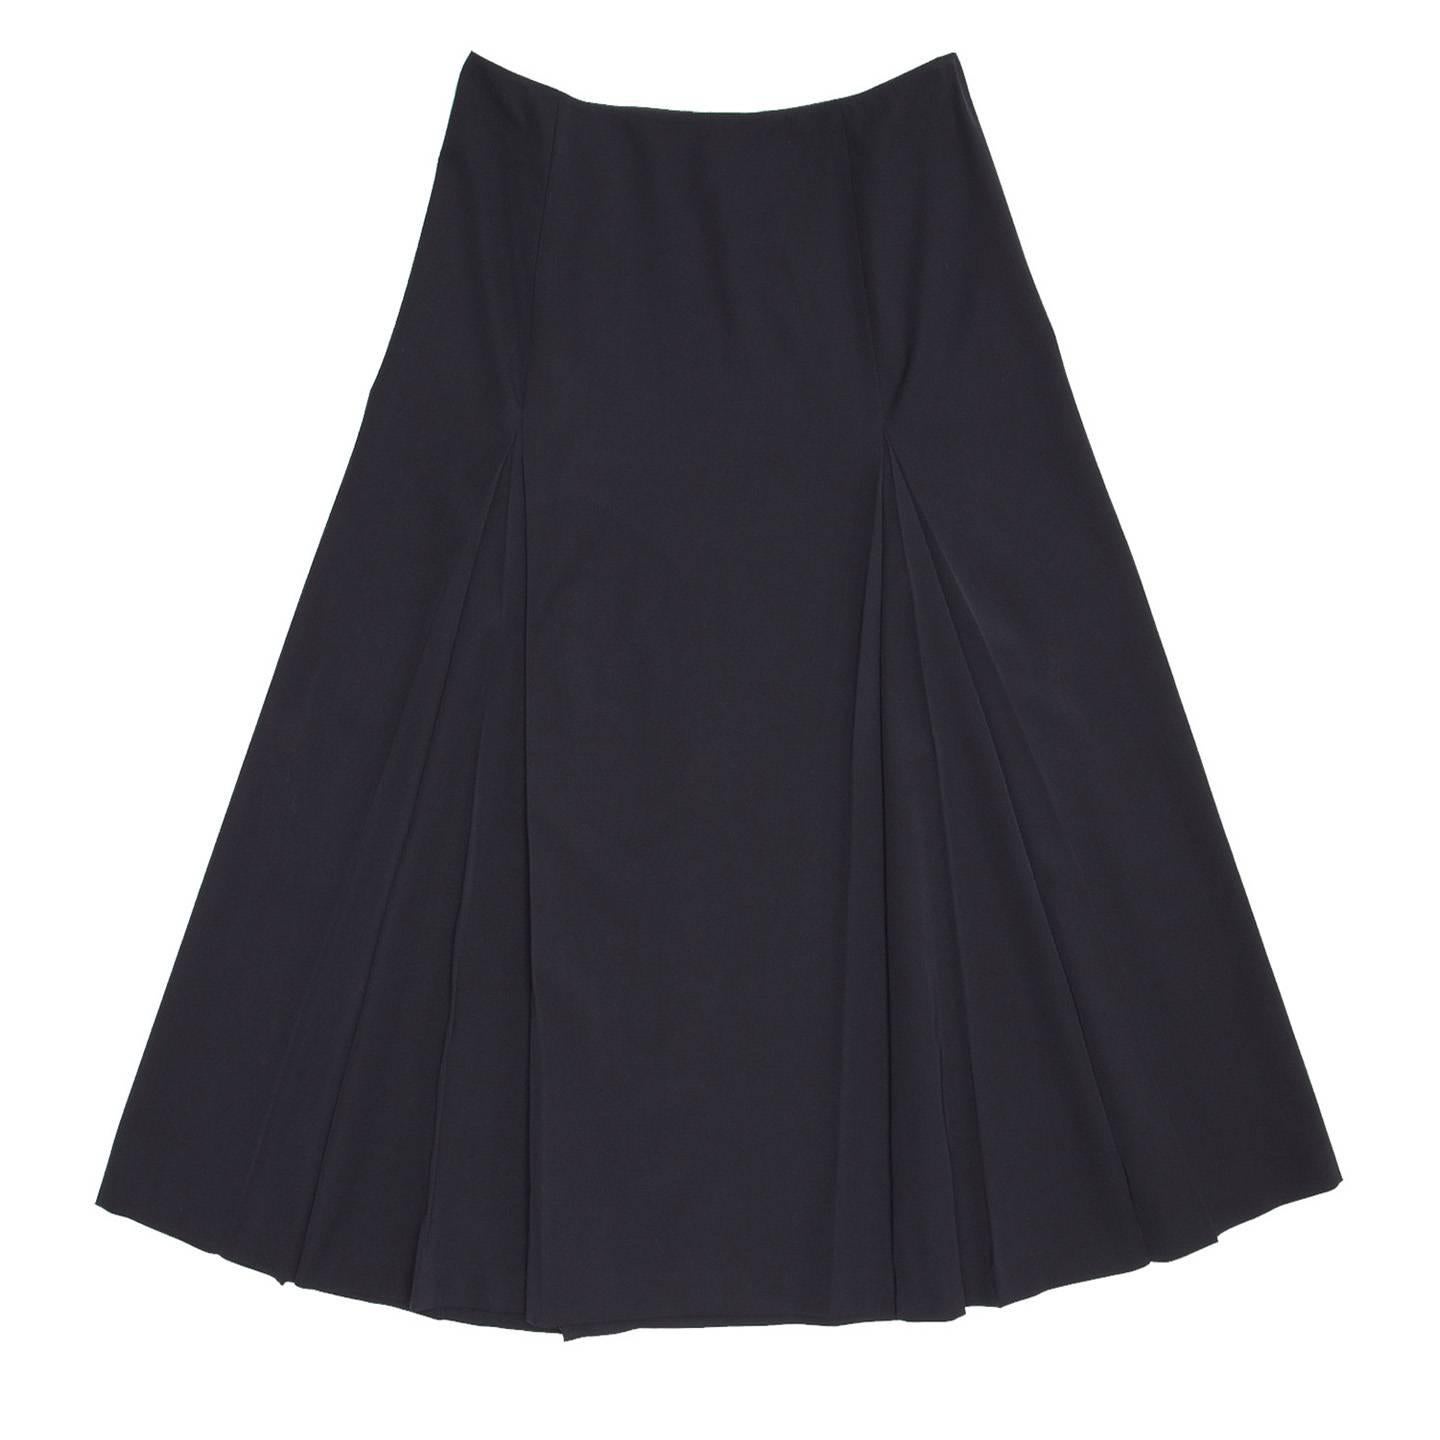 Prada Midnight blue calf length virgin wool skirt with two deep inverted pleats at front and two at back, which emphasize the A-line volume.

Size  46 Italian sizing

Condition  Good: worn a few times